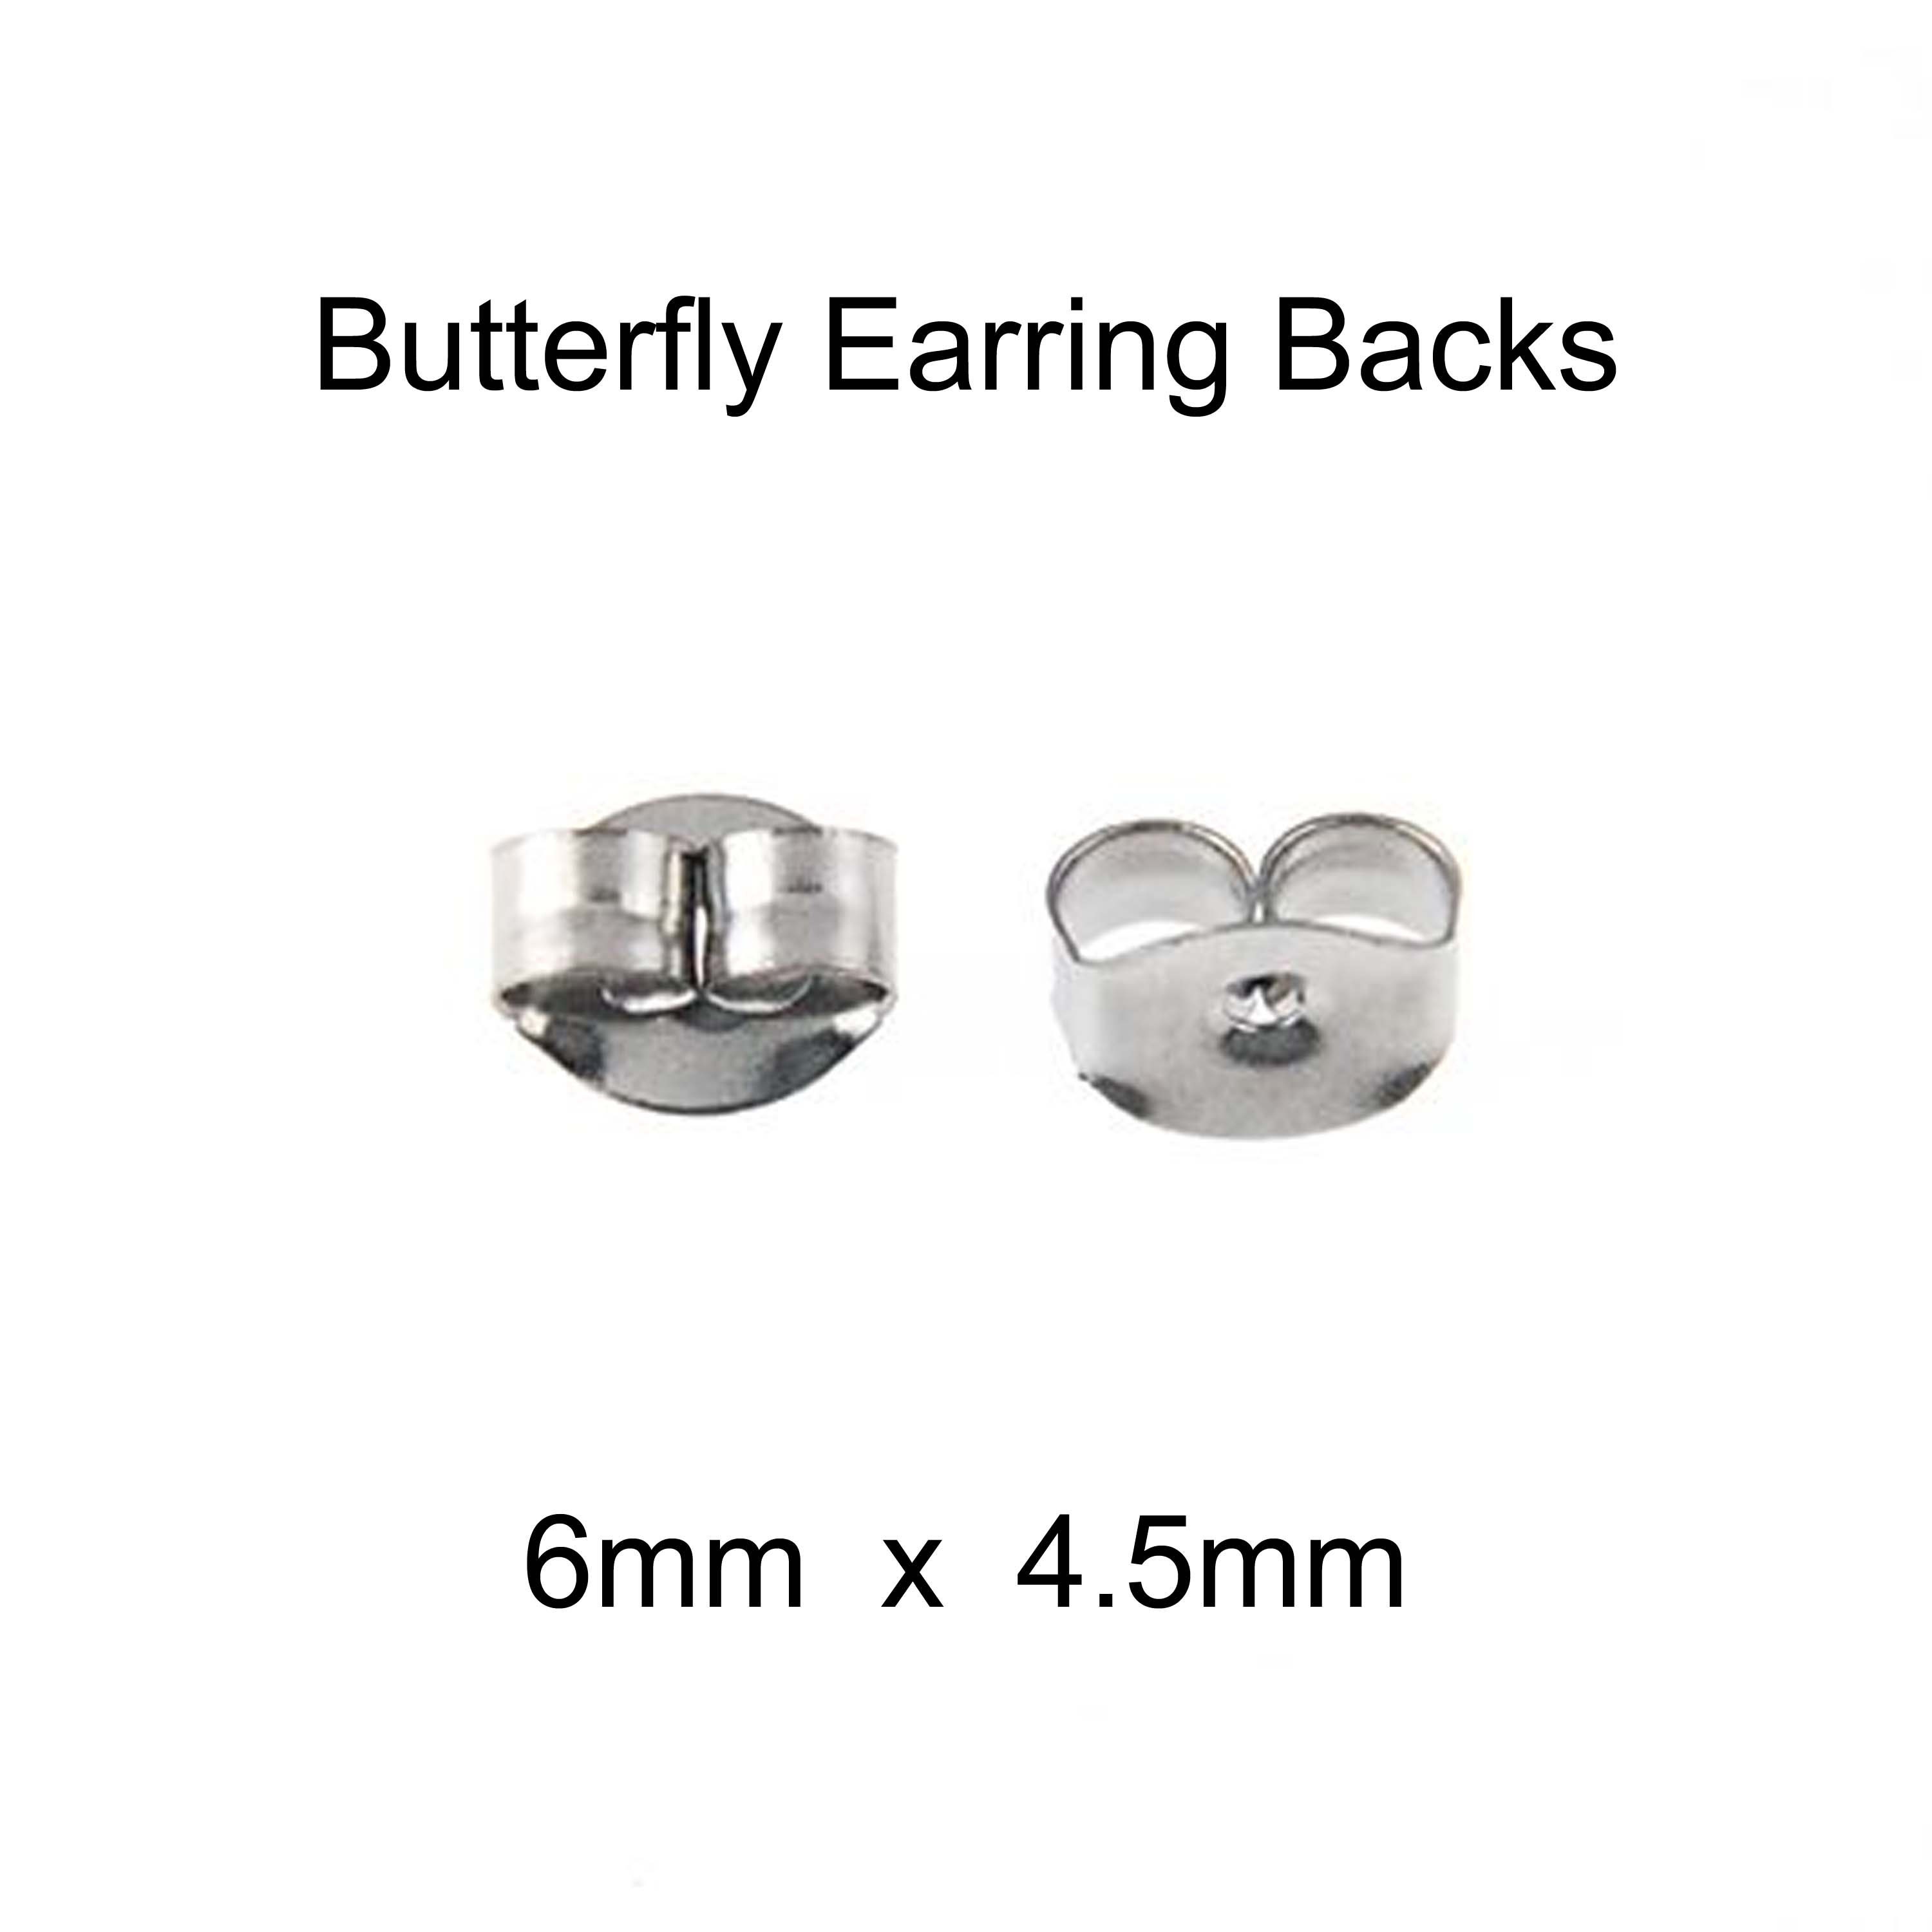 200 Pairs (400 Pieces) Stainless Steel Earrings Posts Flat Pad with  Butterfly Earring Backs for Earring Making Findings (Silver)